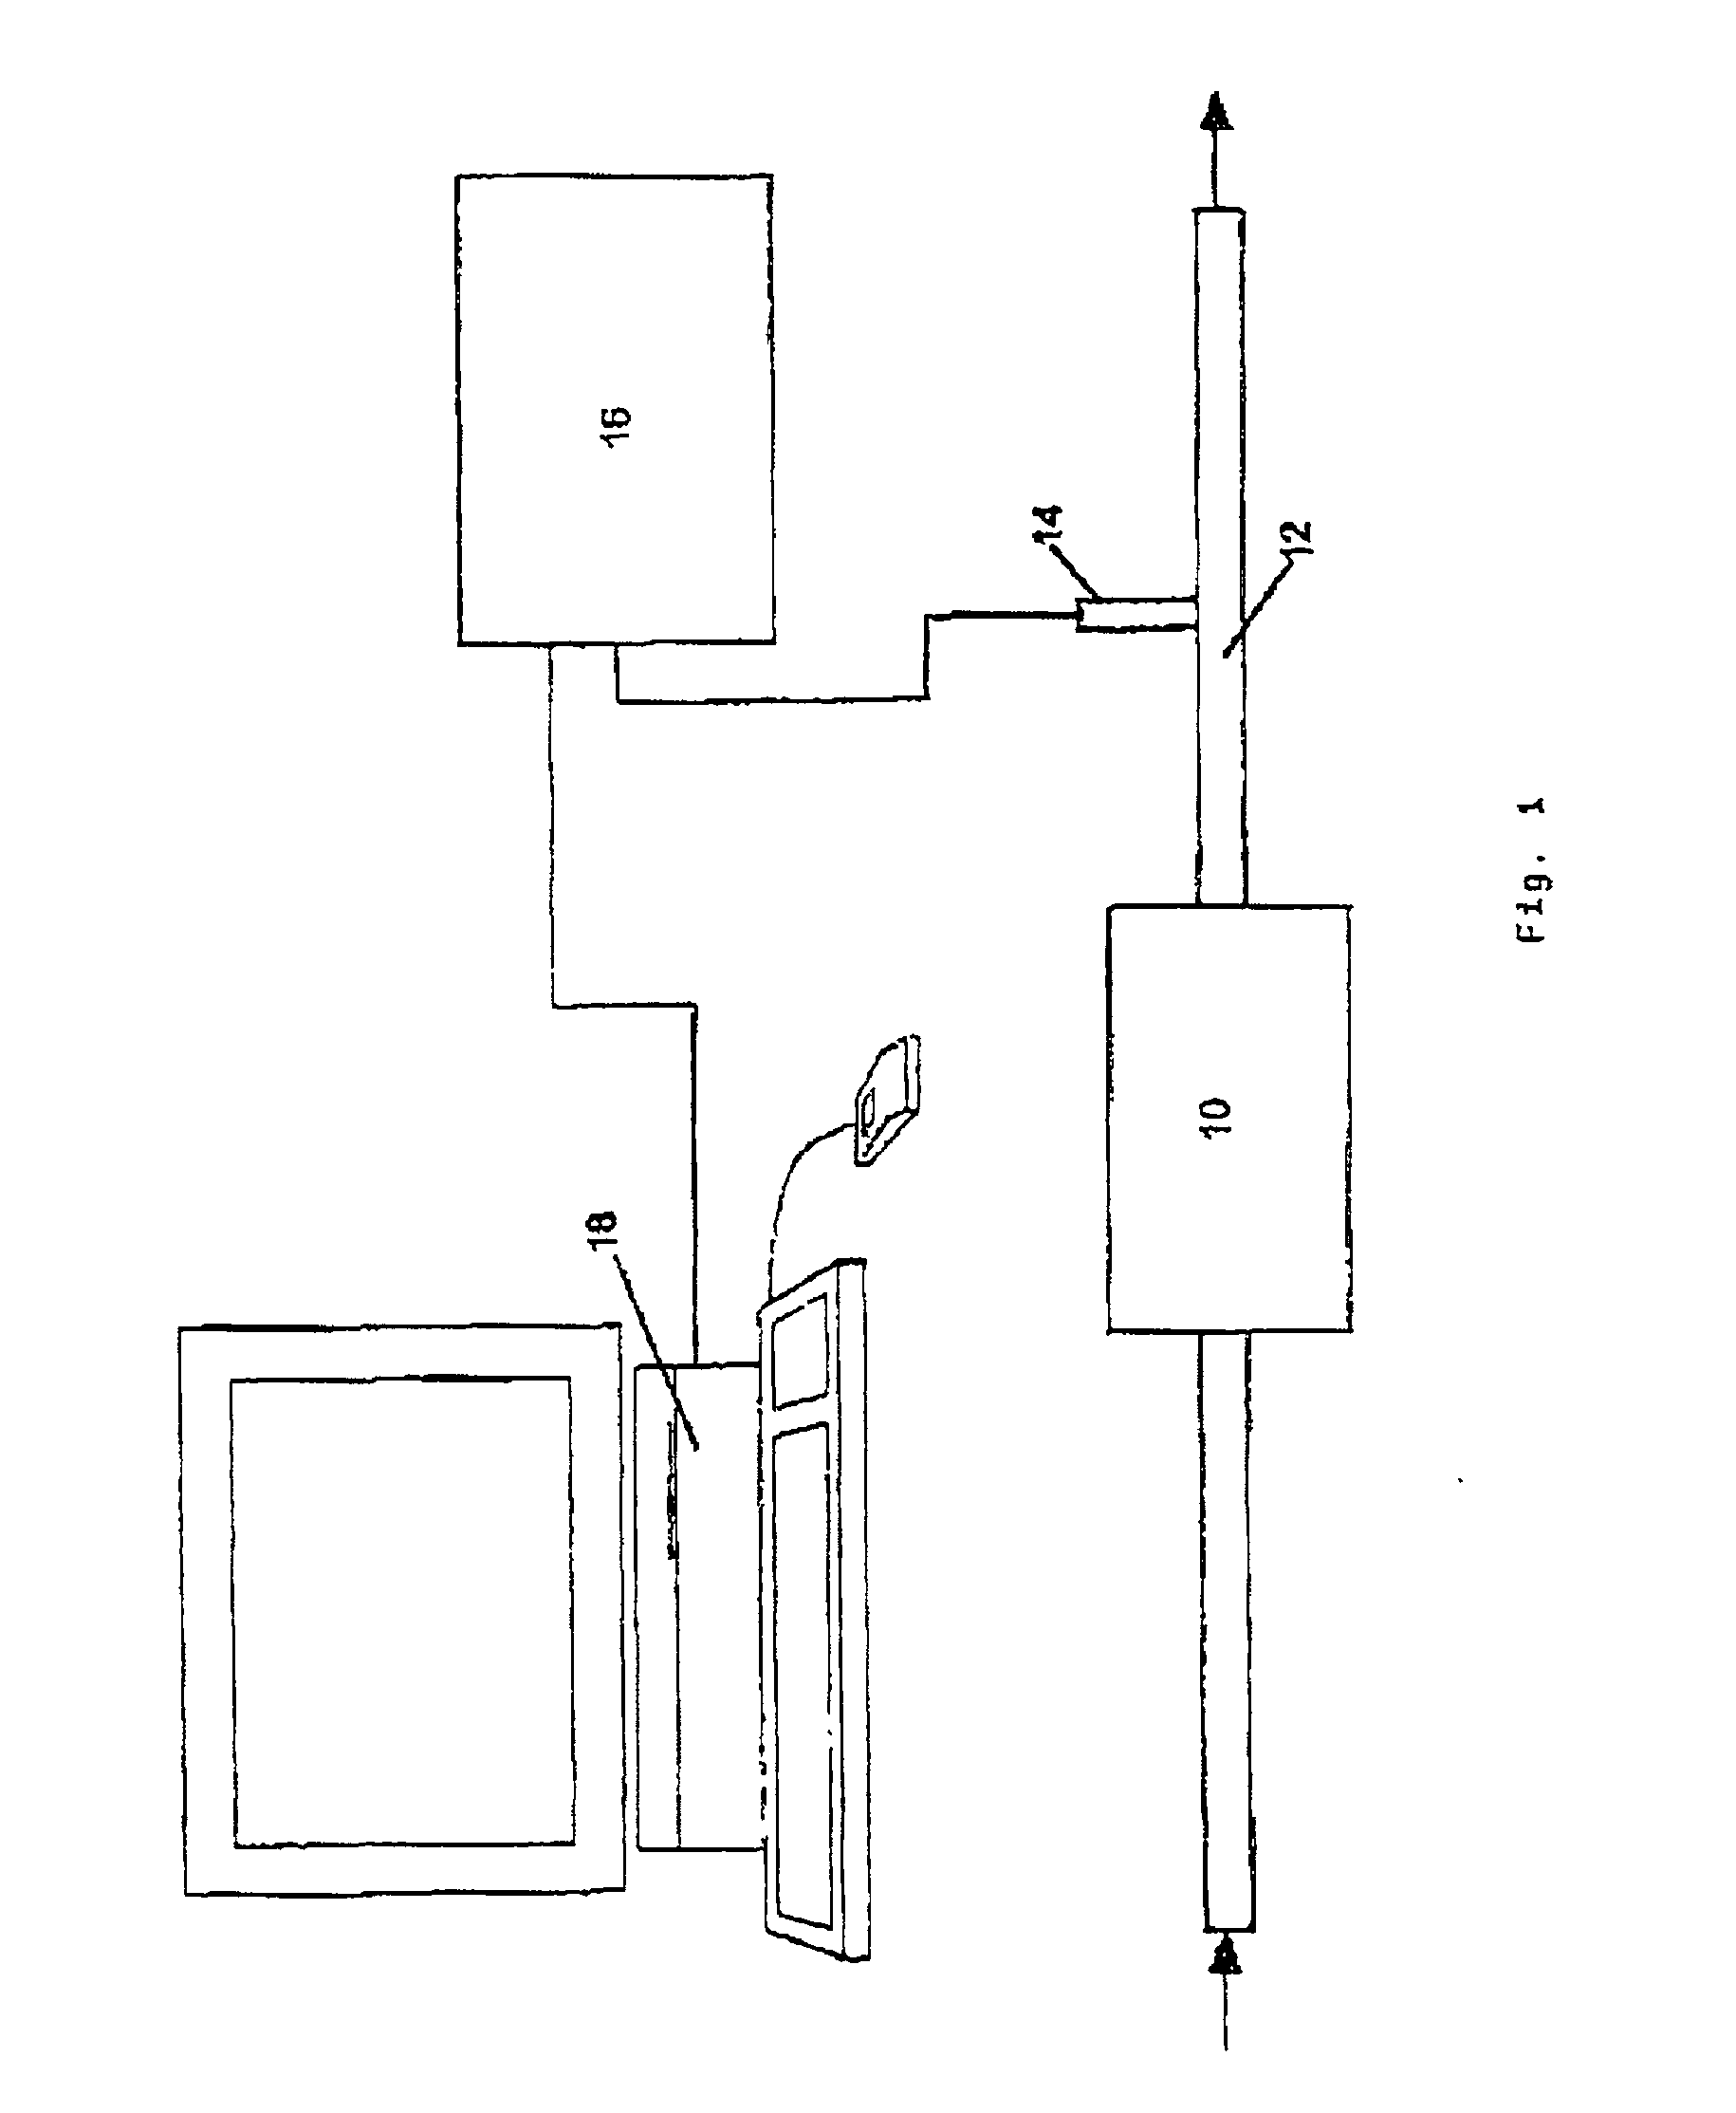 Method, device and computer-readable memory containing a computer program for determining at least one property of a test emulsion and/or test suspension